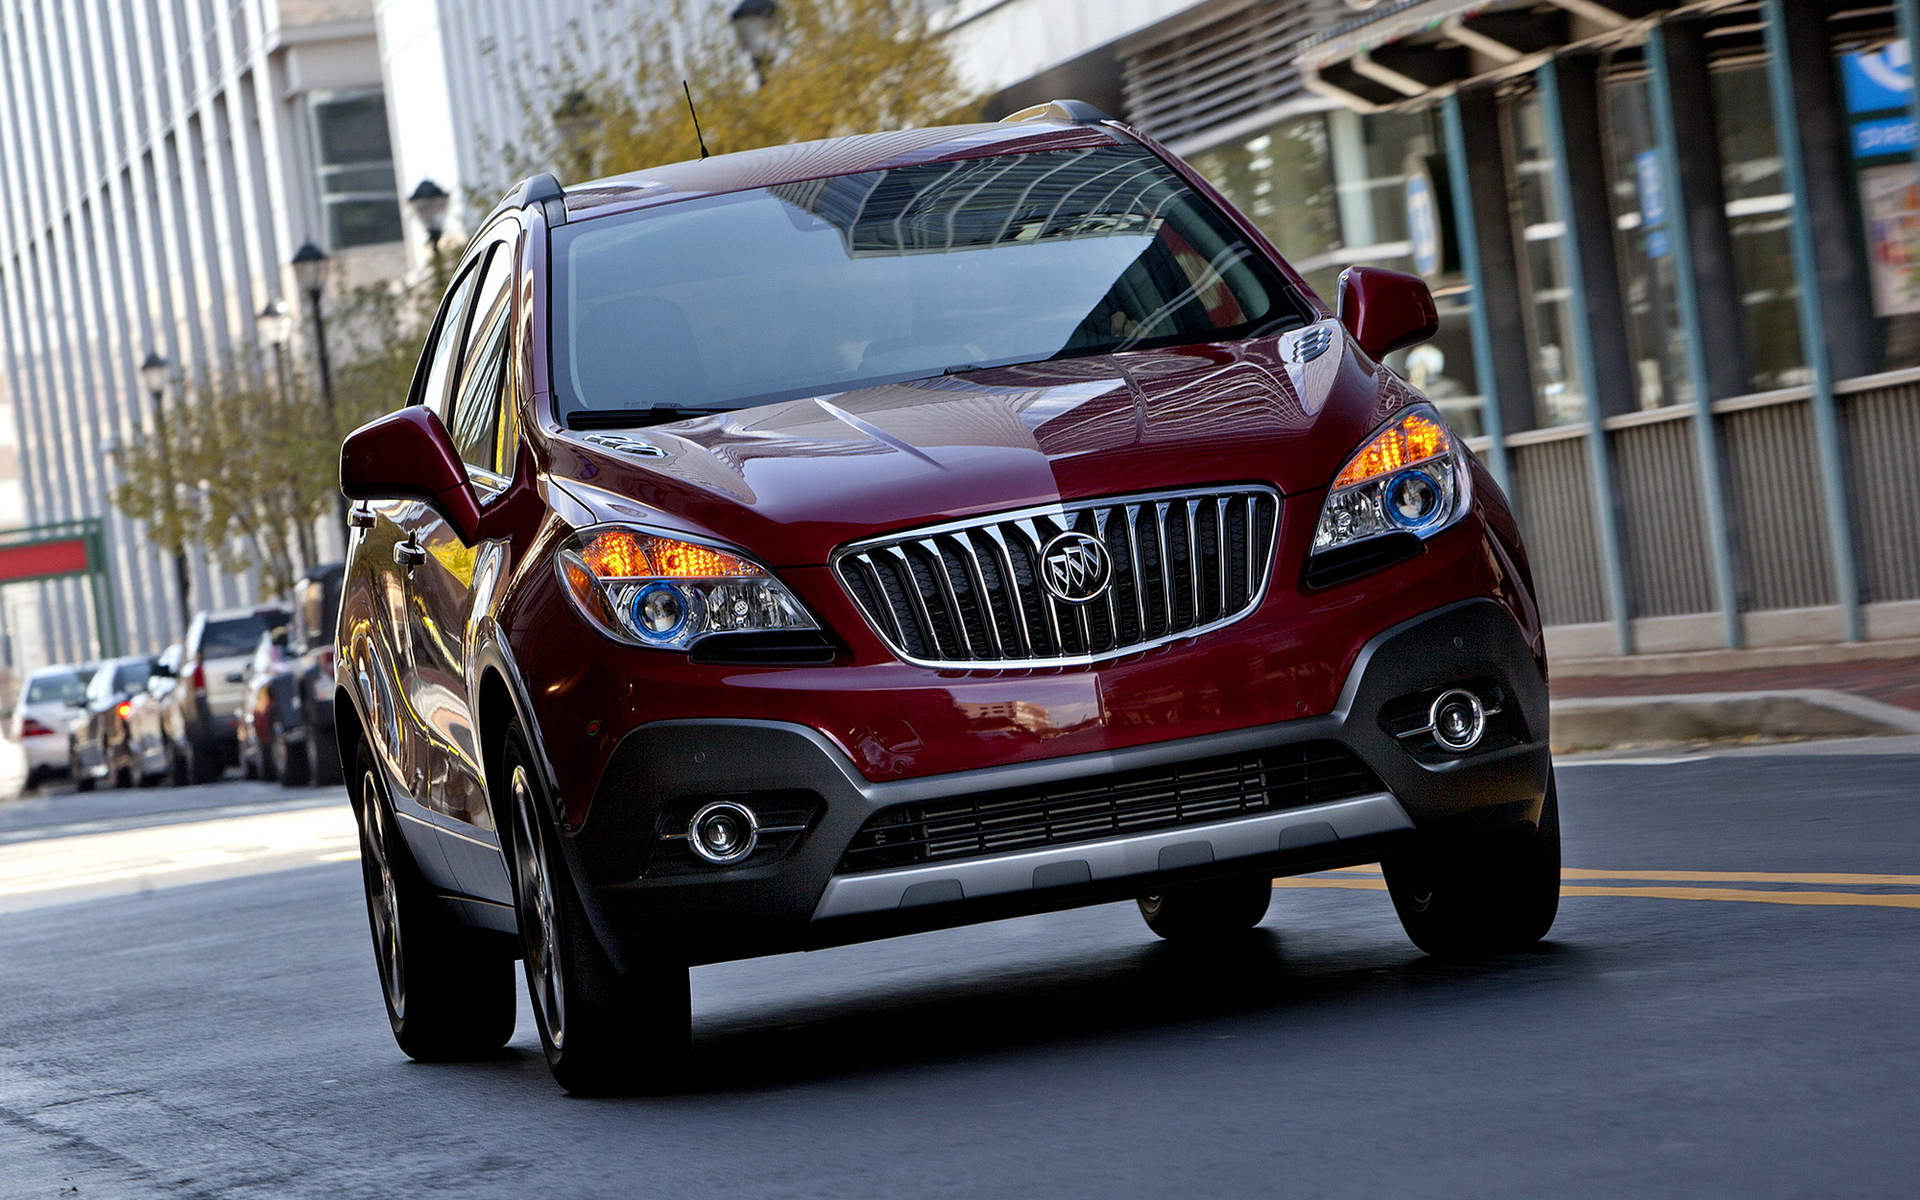 Buick Encore, 2012 wallpapers, High-quality images, Compact SUV, 1920x1200 HD Desktop